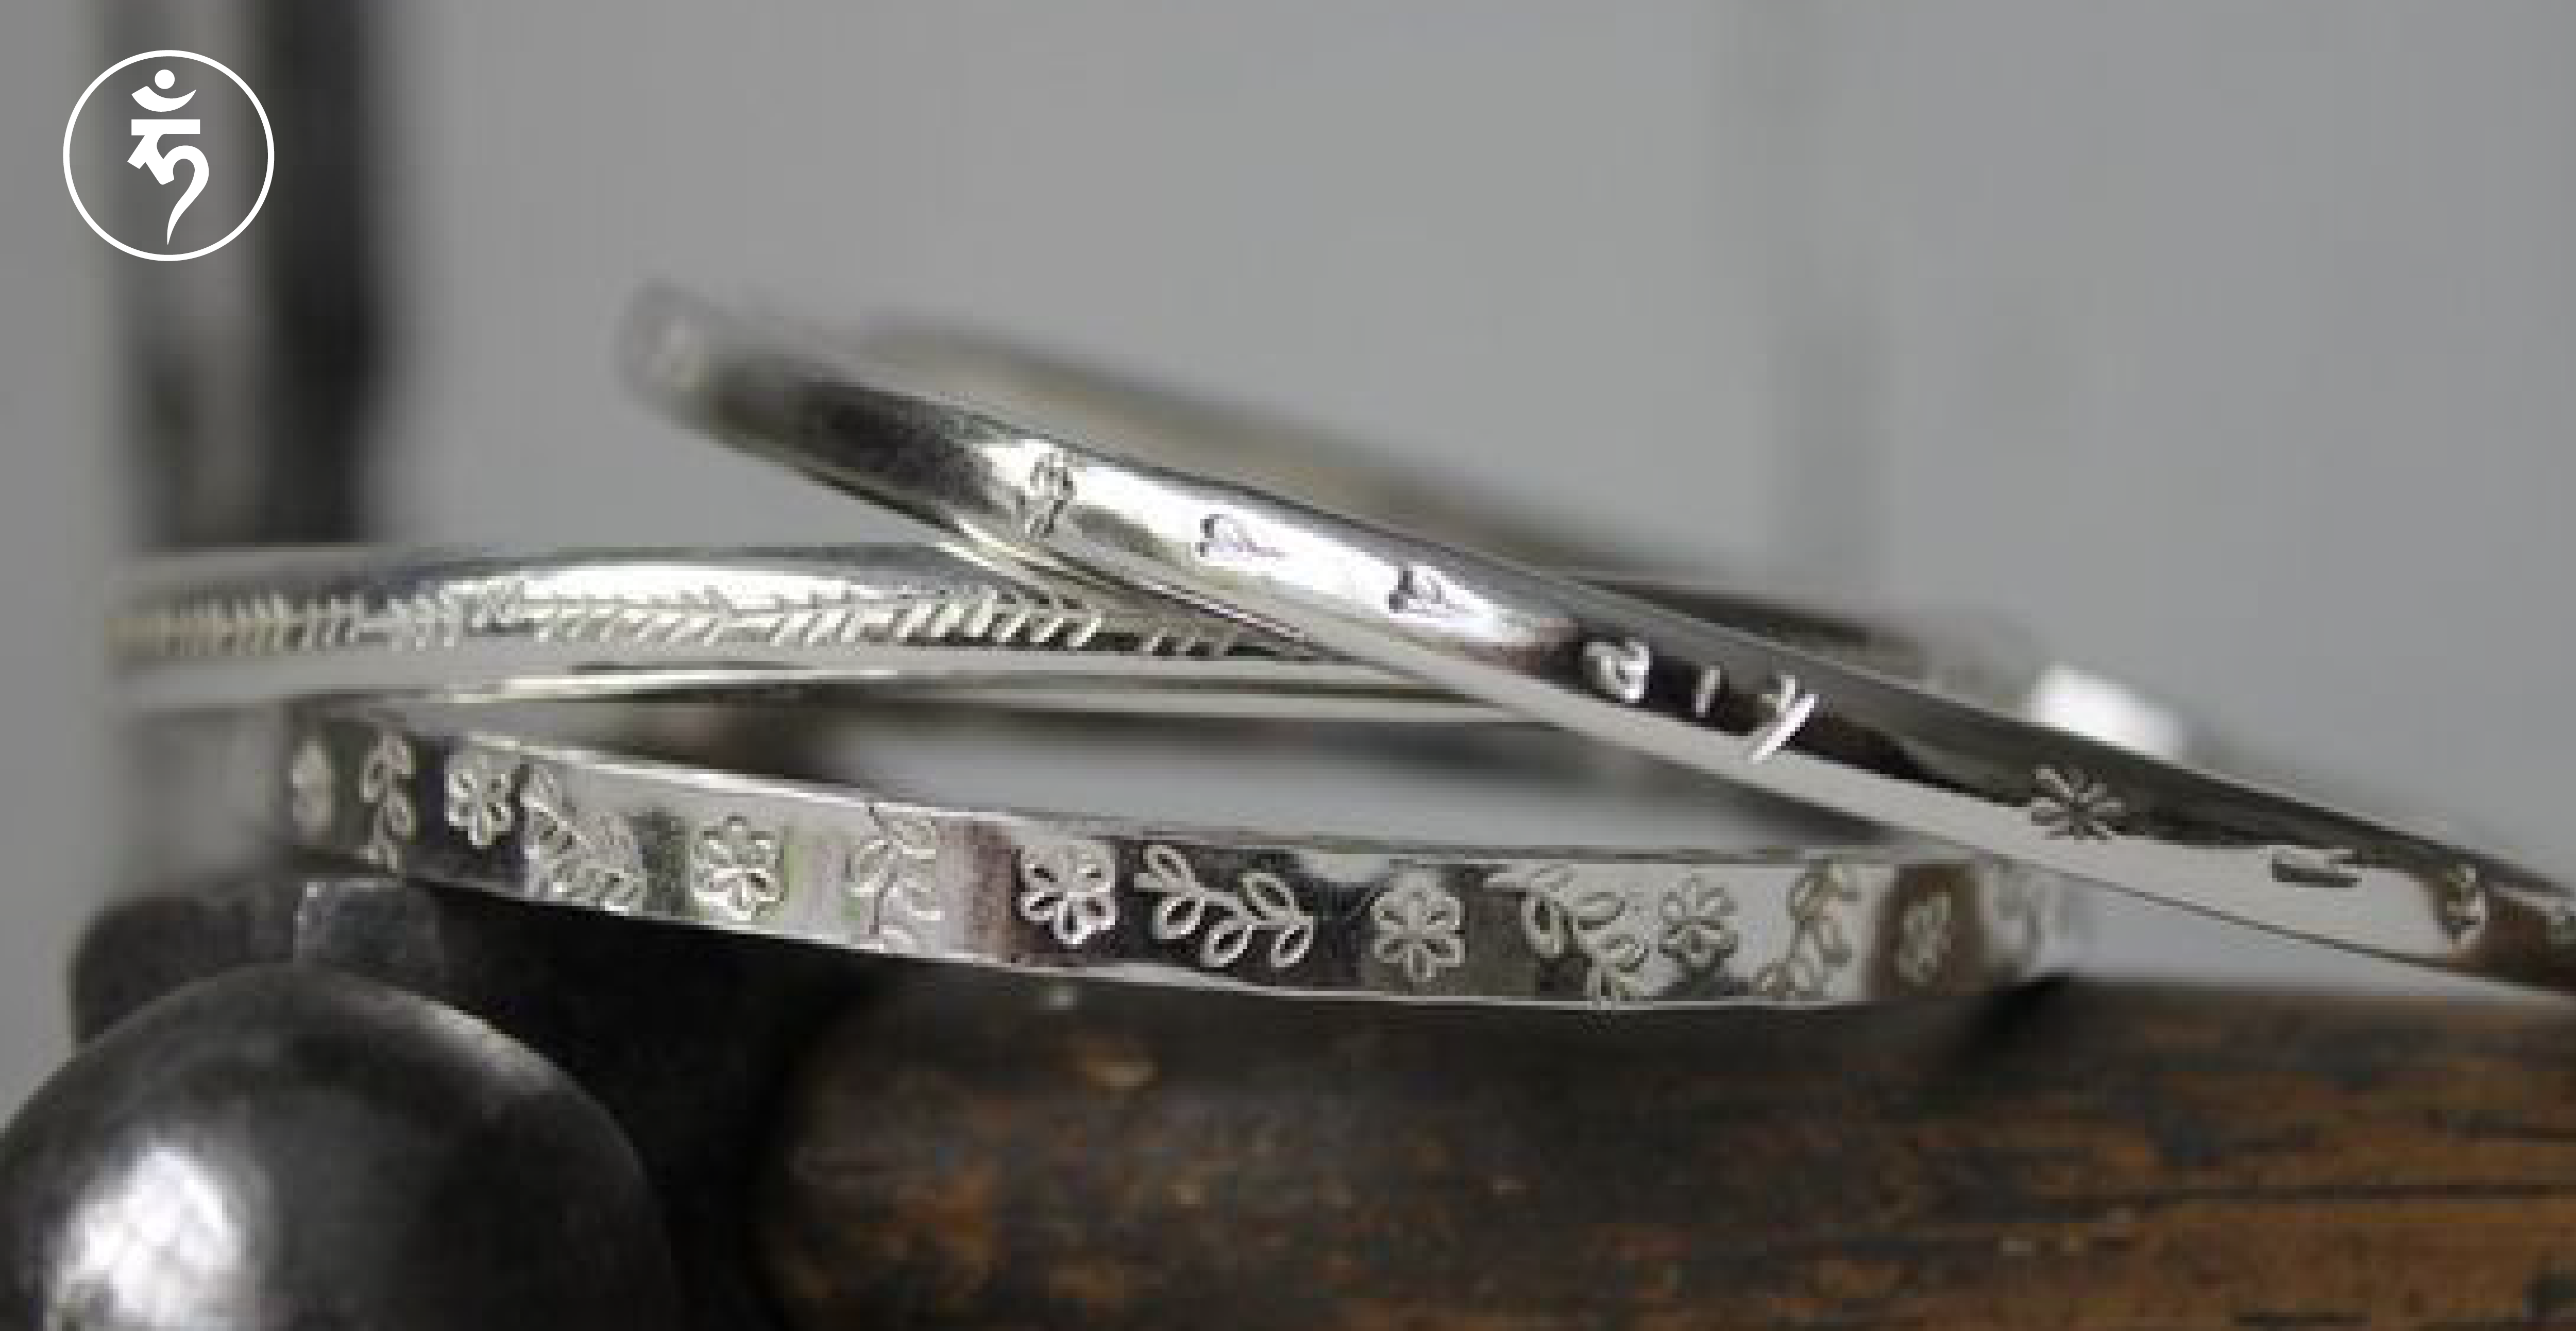 HOW DOES 925 STERLING SILVER vs PURE SILVER